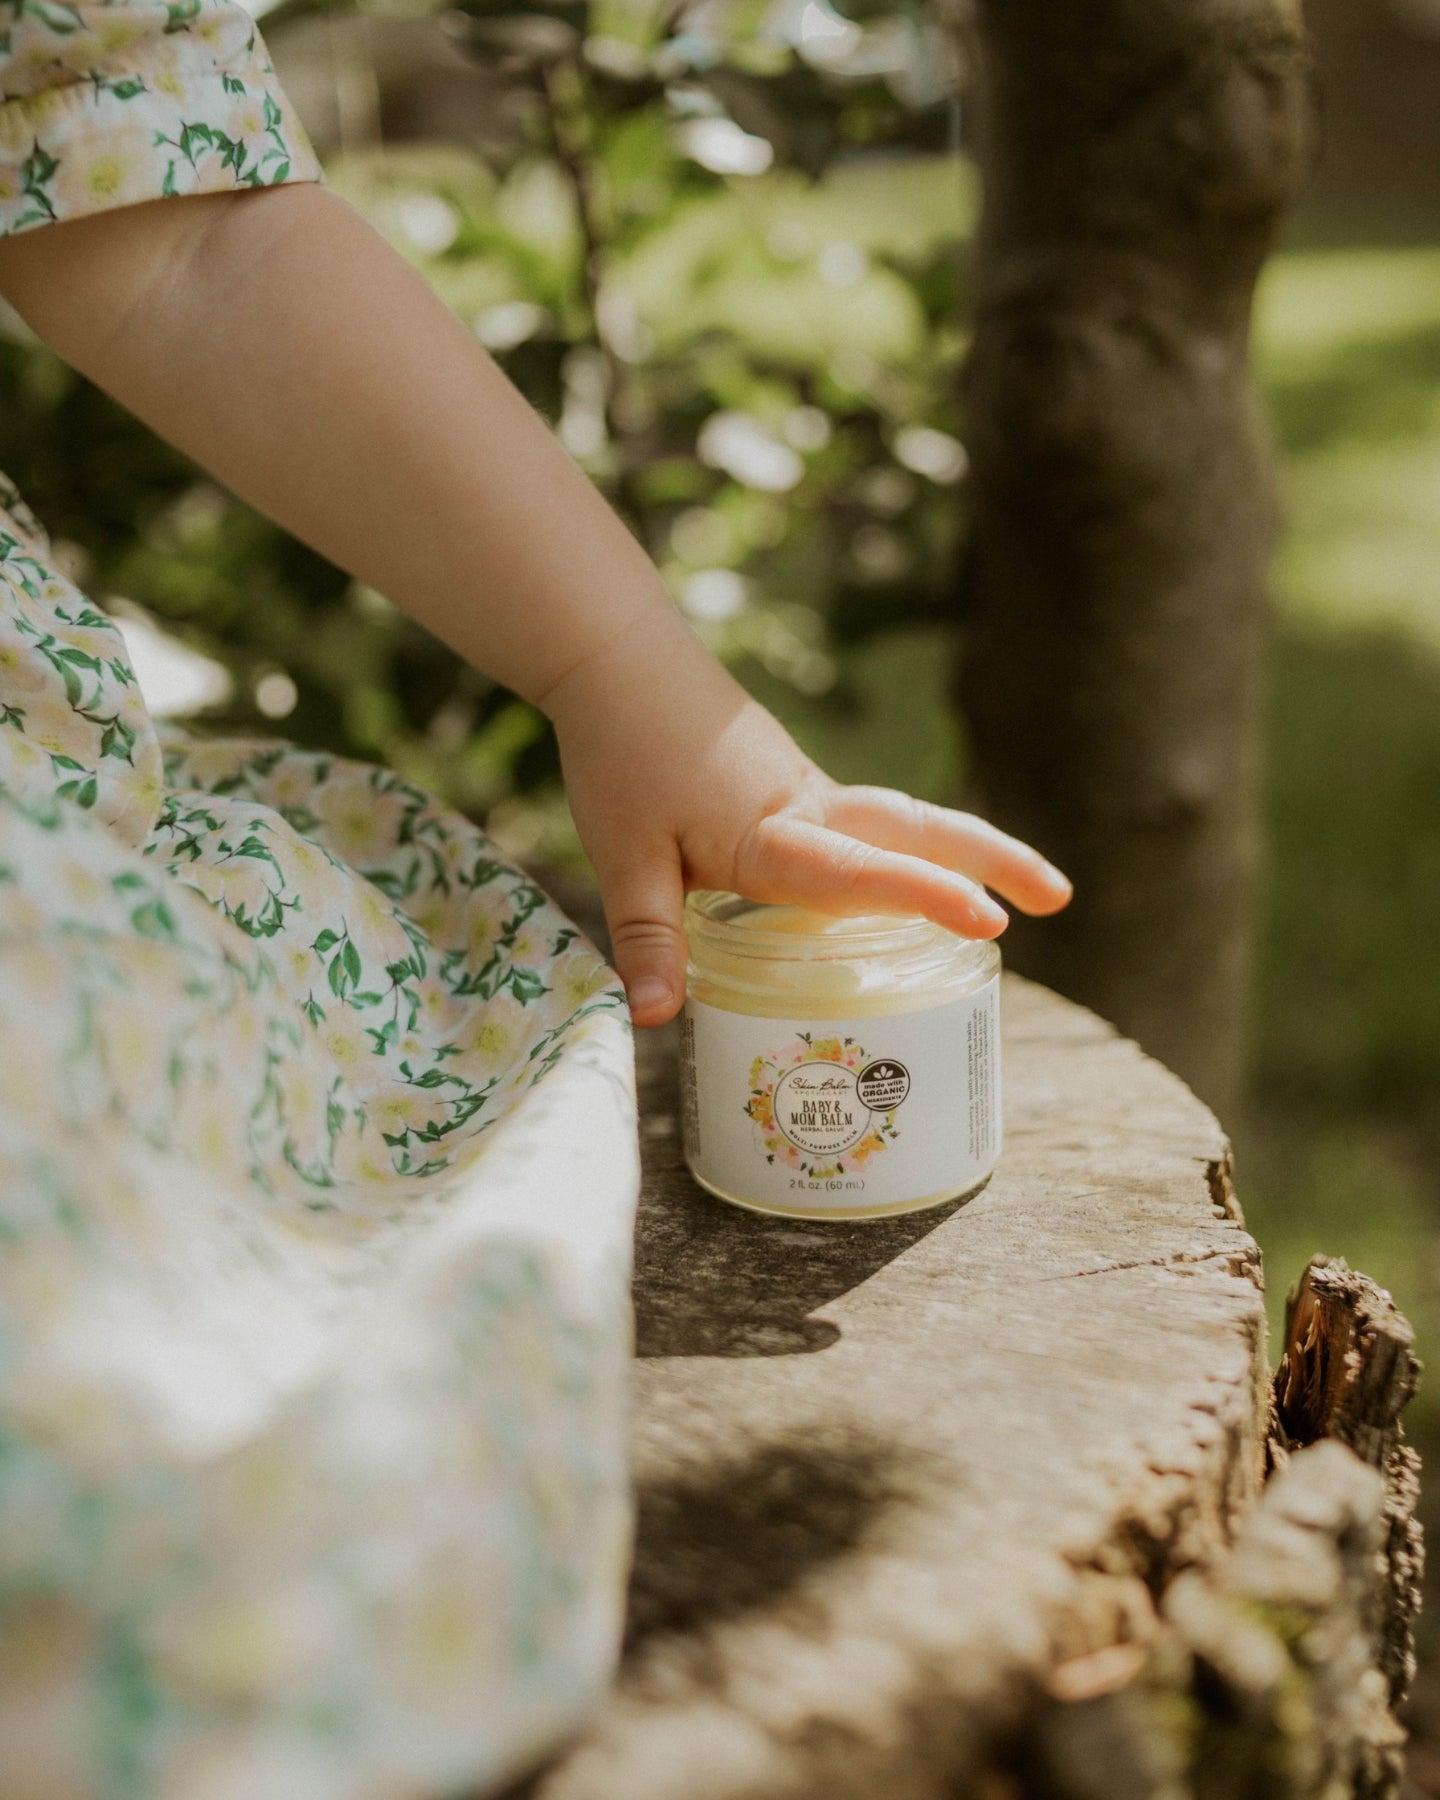 A close-up shot of a toddler resting her hand on the Baby & Mom Balm while sitting on a tree stump.